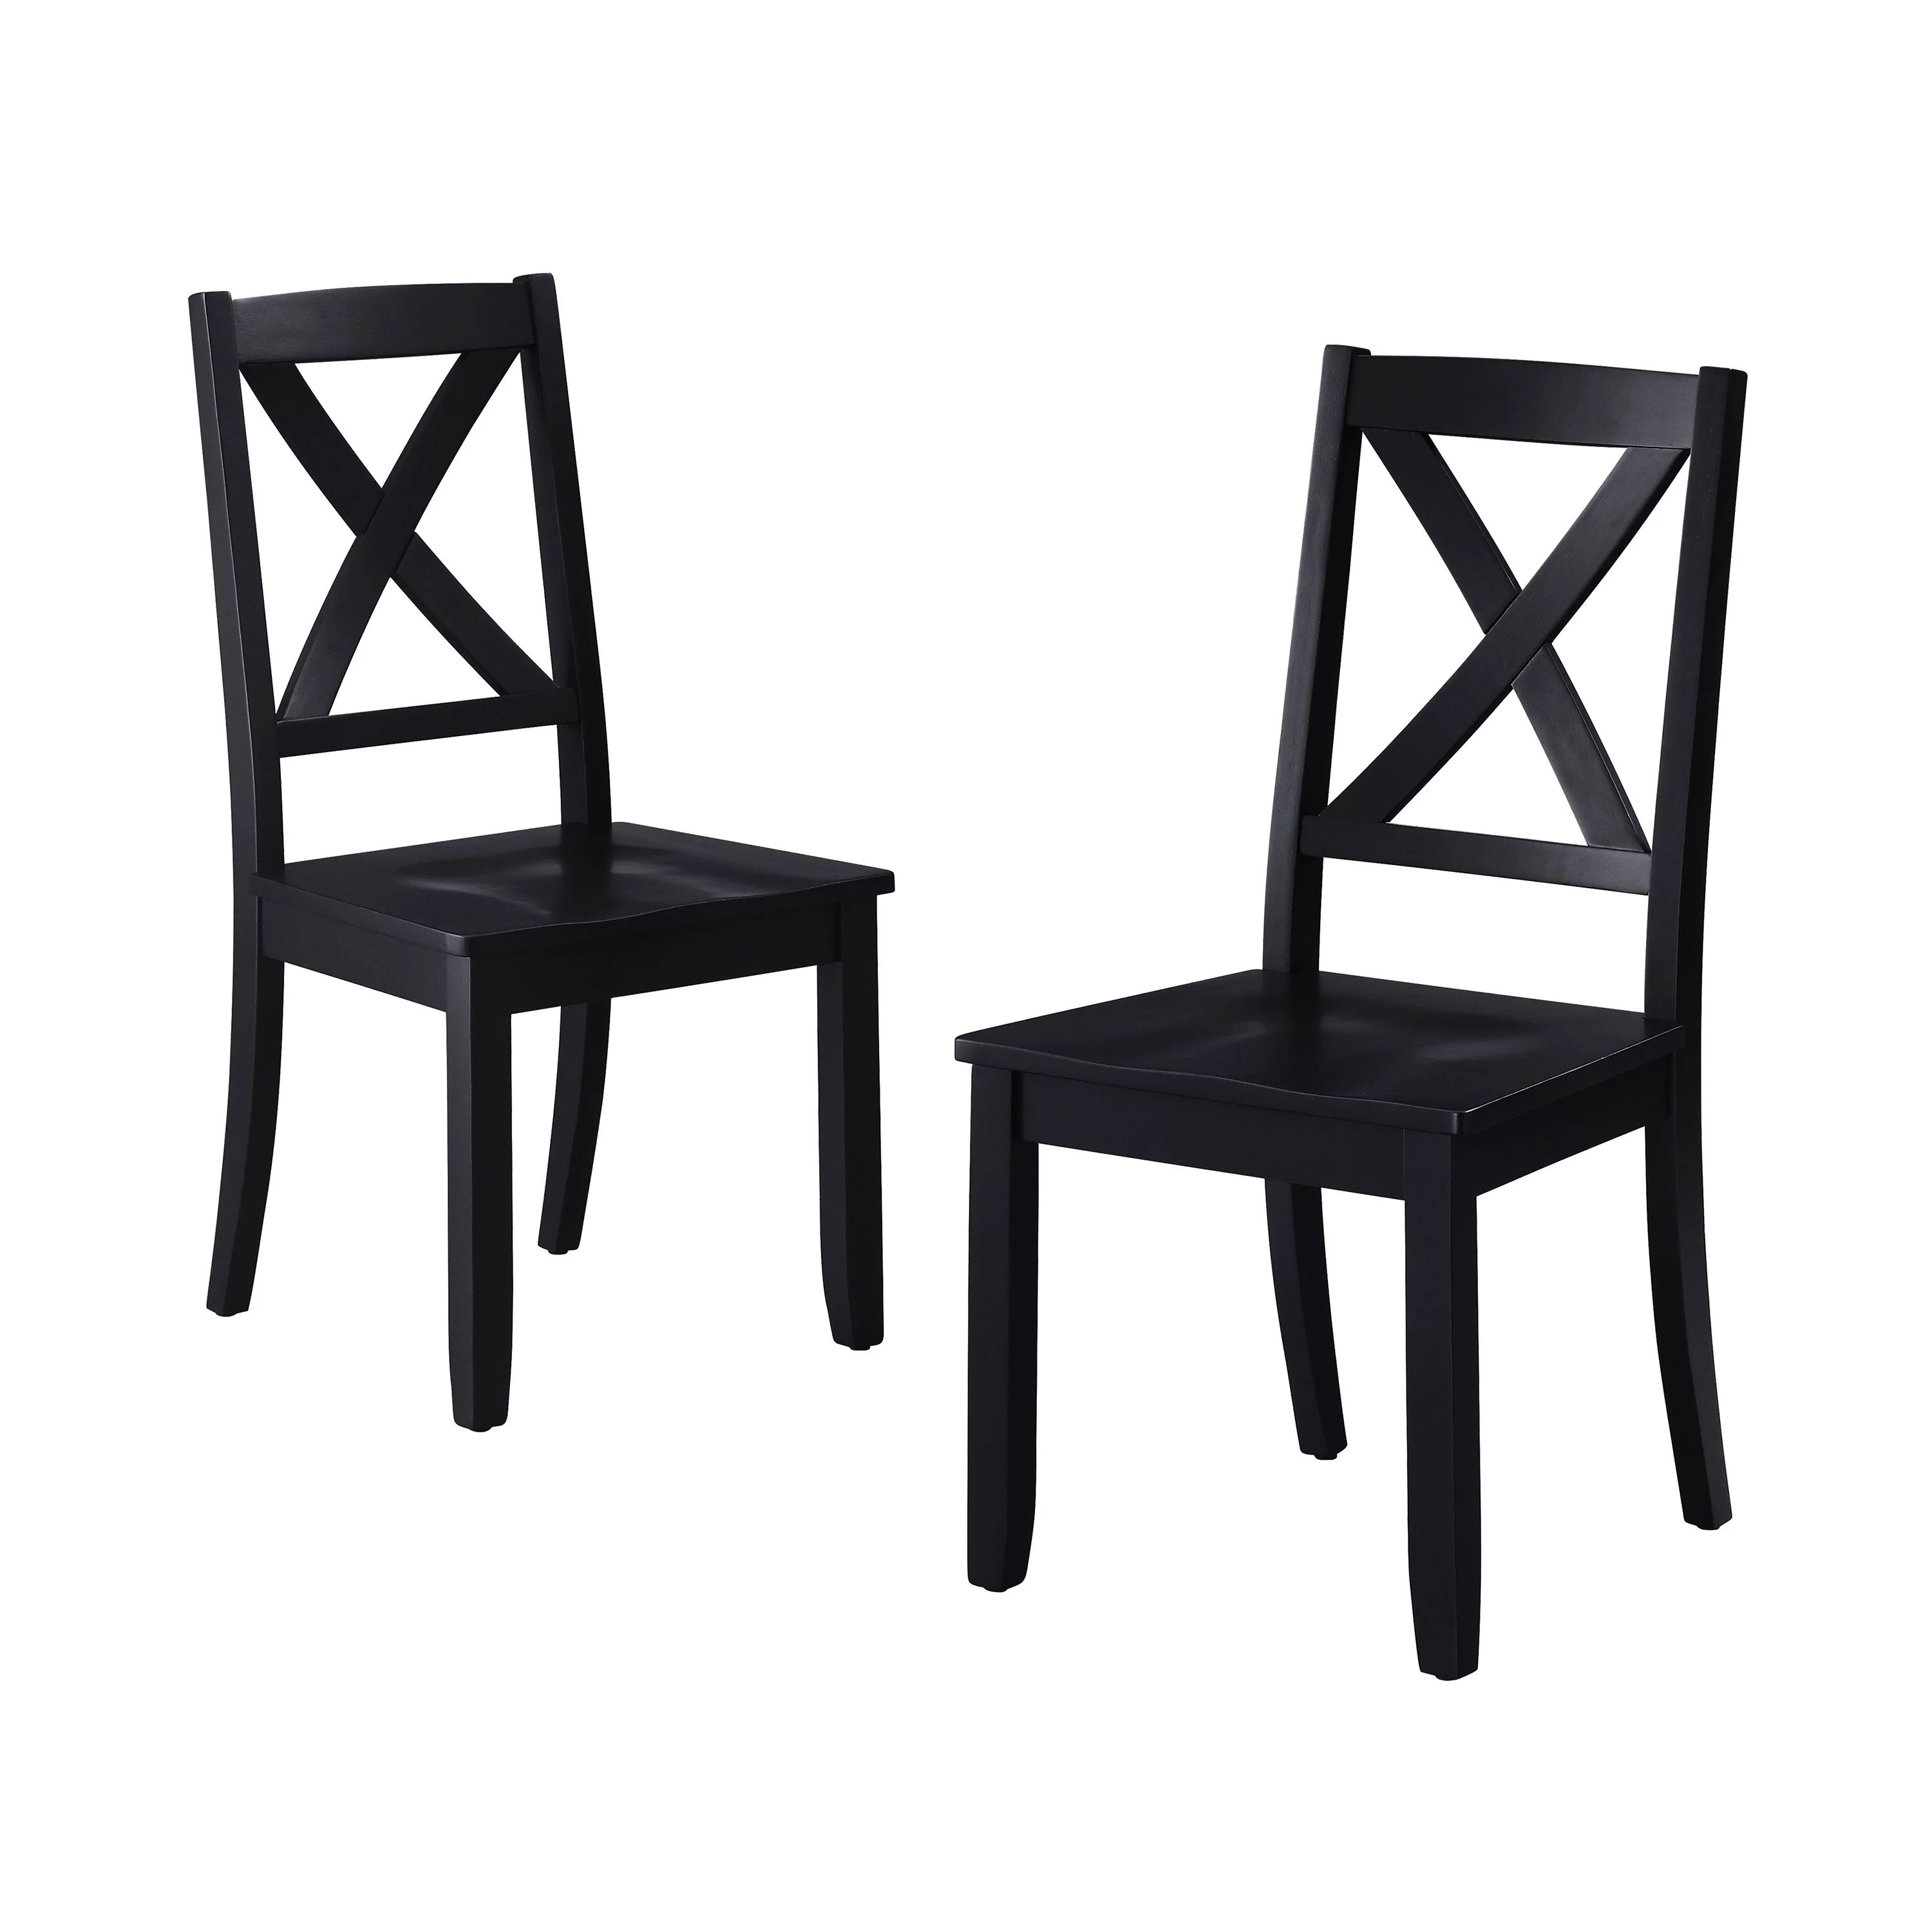 Better Homes & Gardens Maddox Crossing Dining Chairs, Set of 2, Black | Walmart (US)